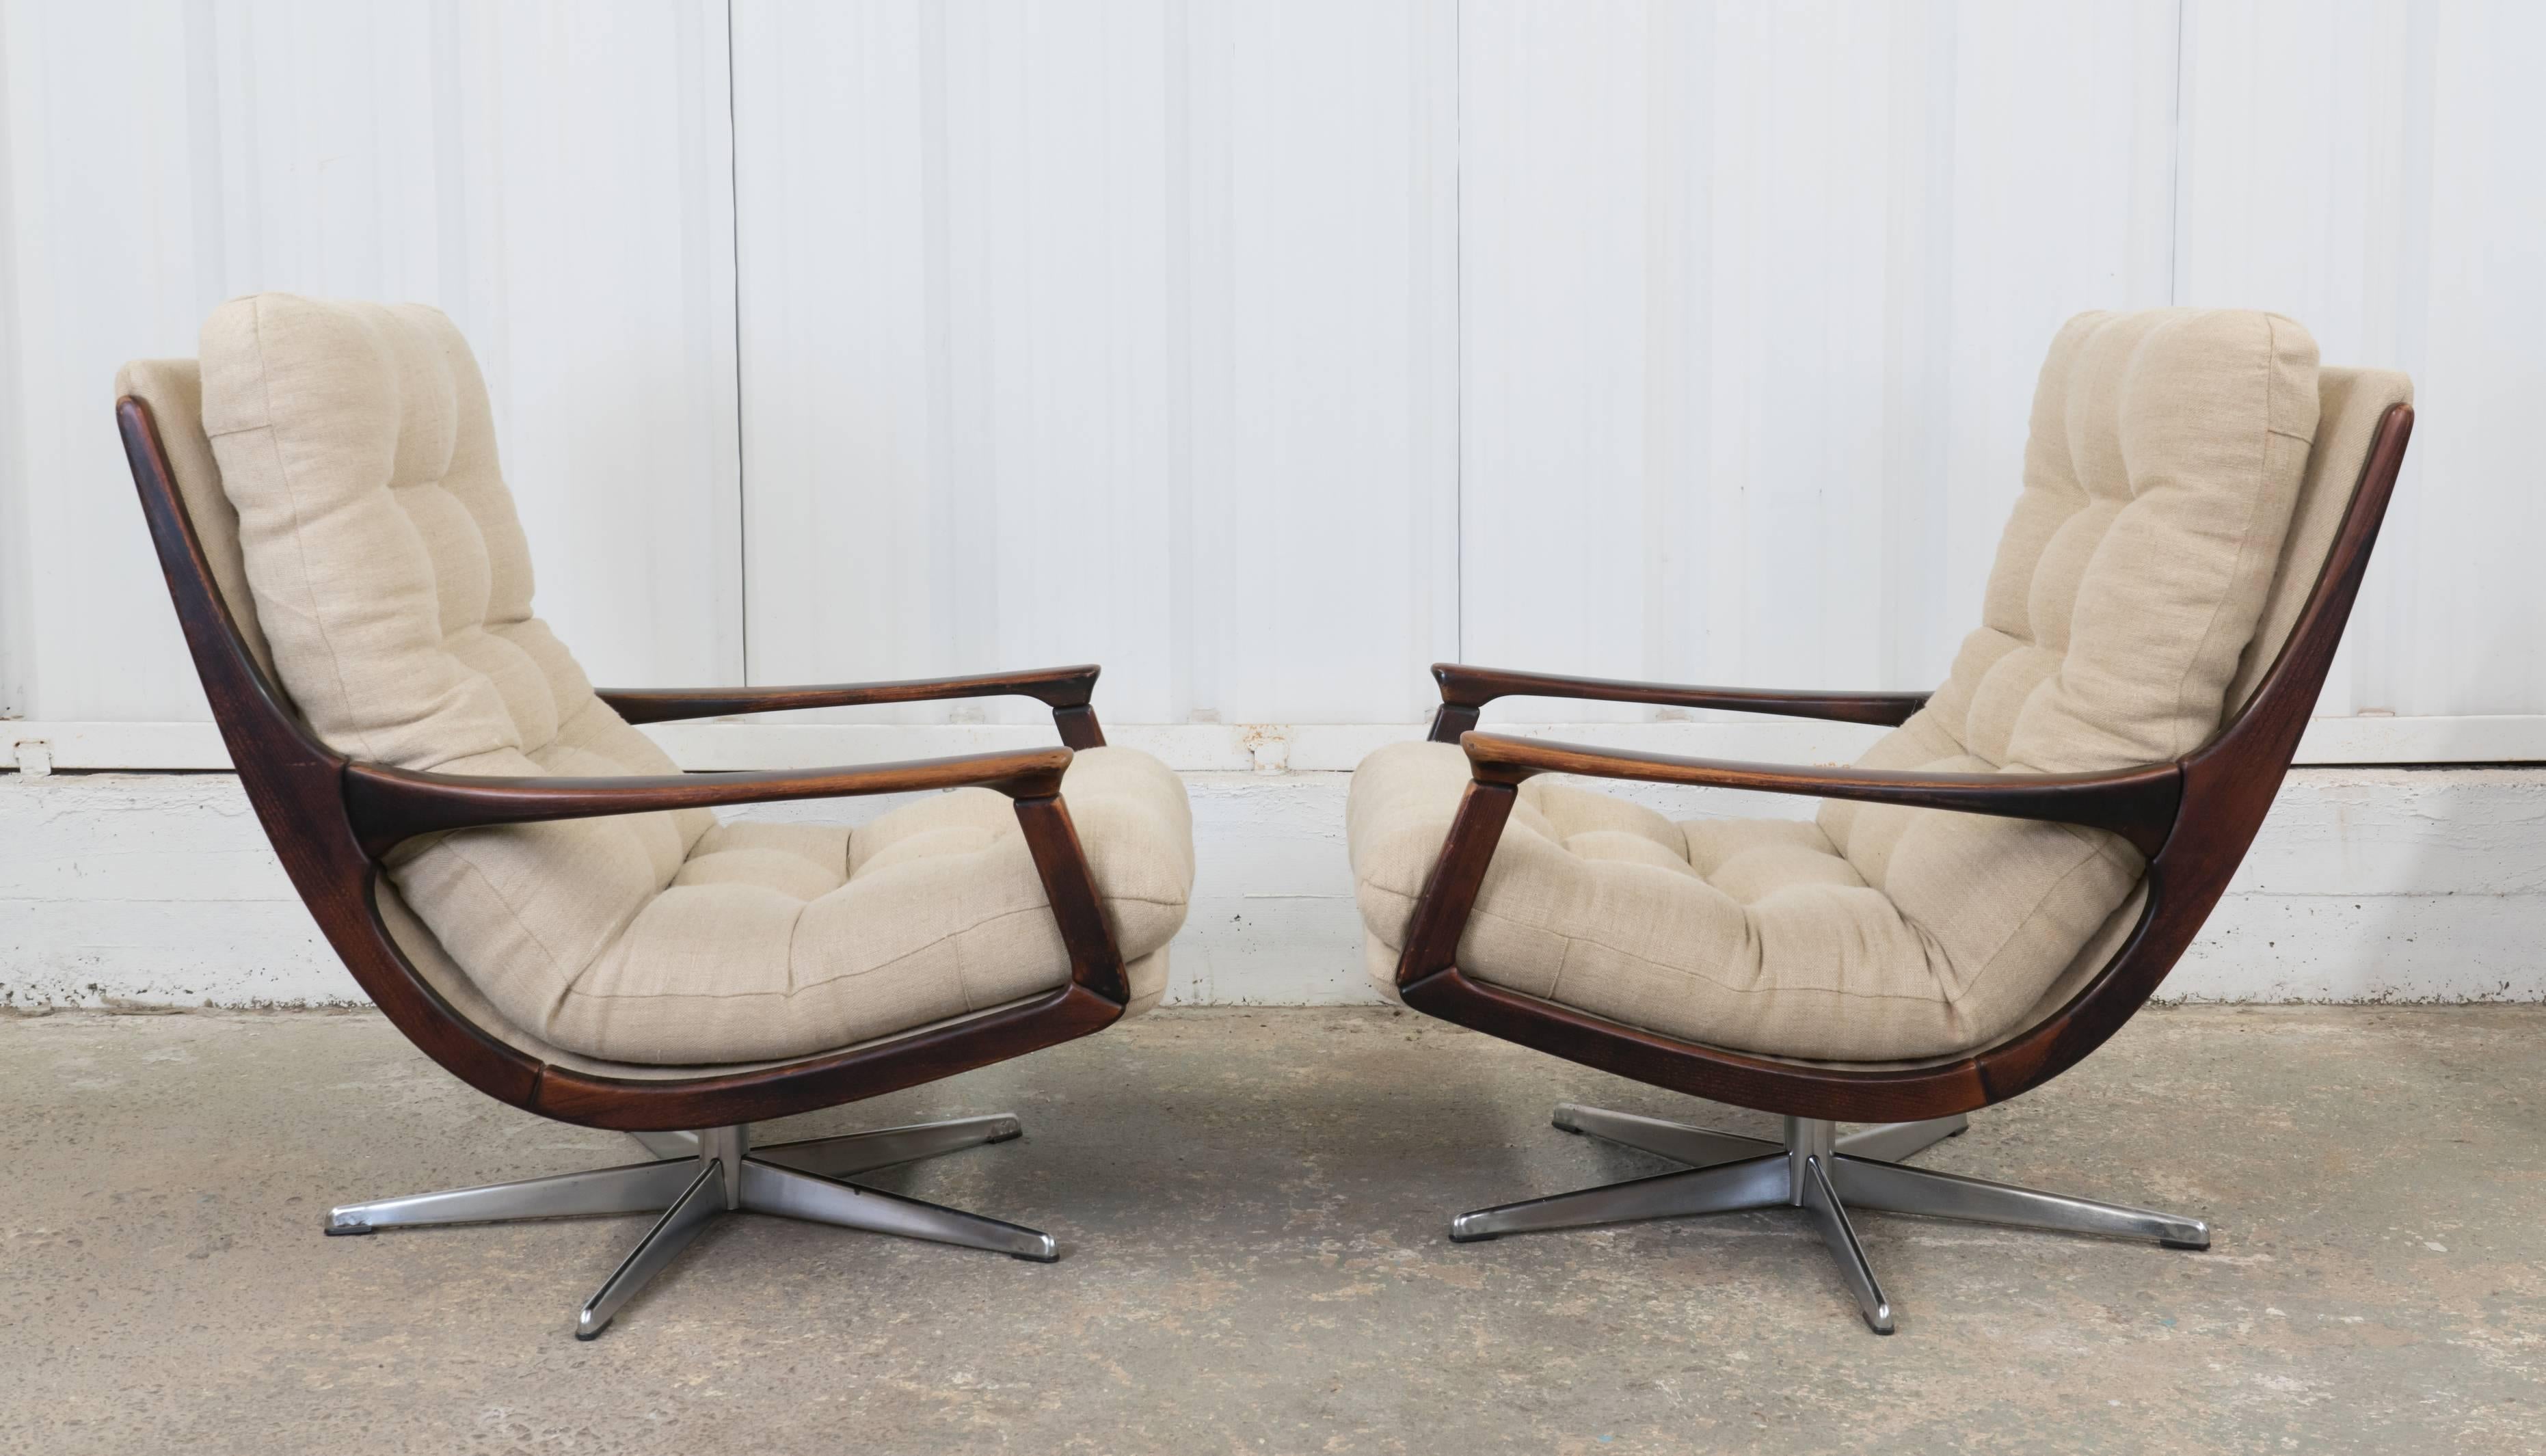 Pair of 1970s swivel walnut armchairs newly upholstered in a neutral hemp fabric with button tuft detail on the back and seat cushions. Beautifully aged wood arms and chrome swivel base.